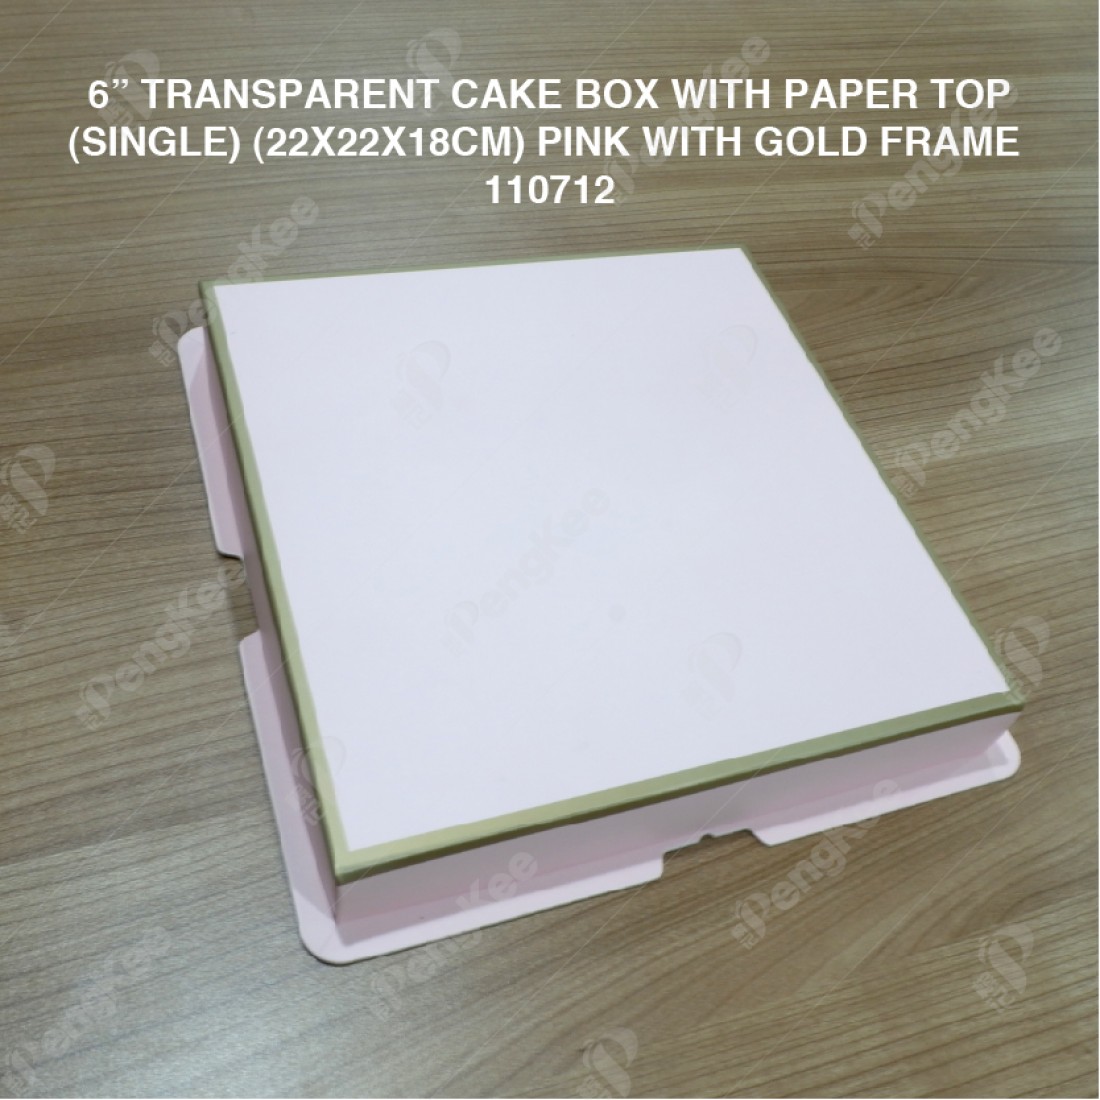 6" TRANSPARENT CAKE BOX WITH PAPER TOP(SINGLE) (22*22*18CM)- PINK WITH GOLD FRAME